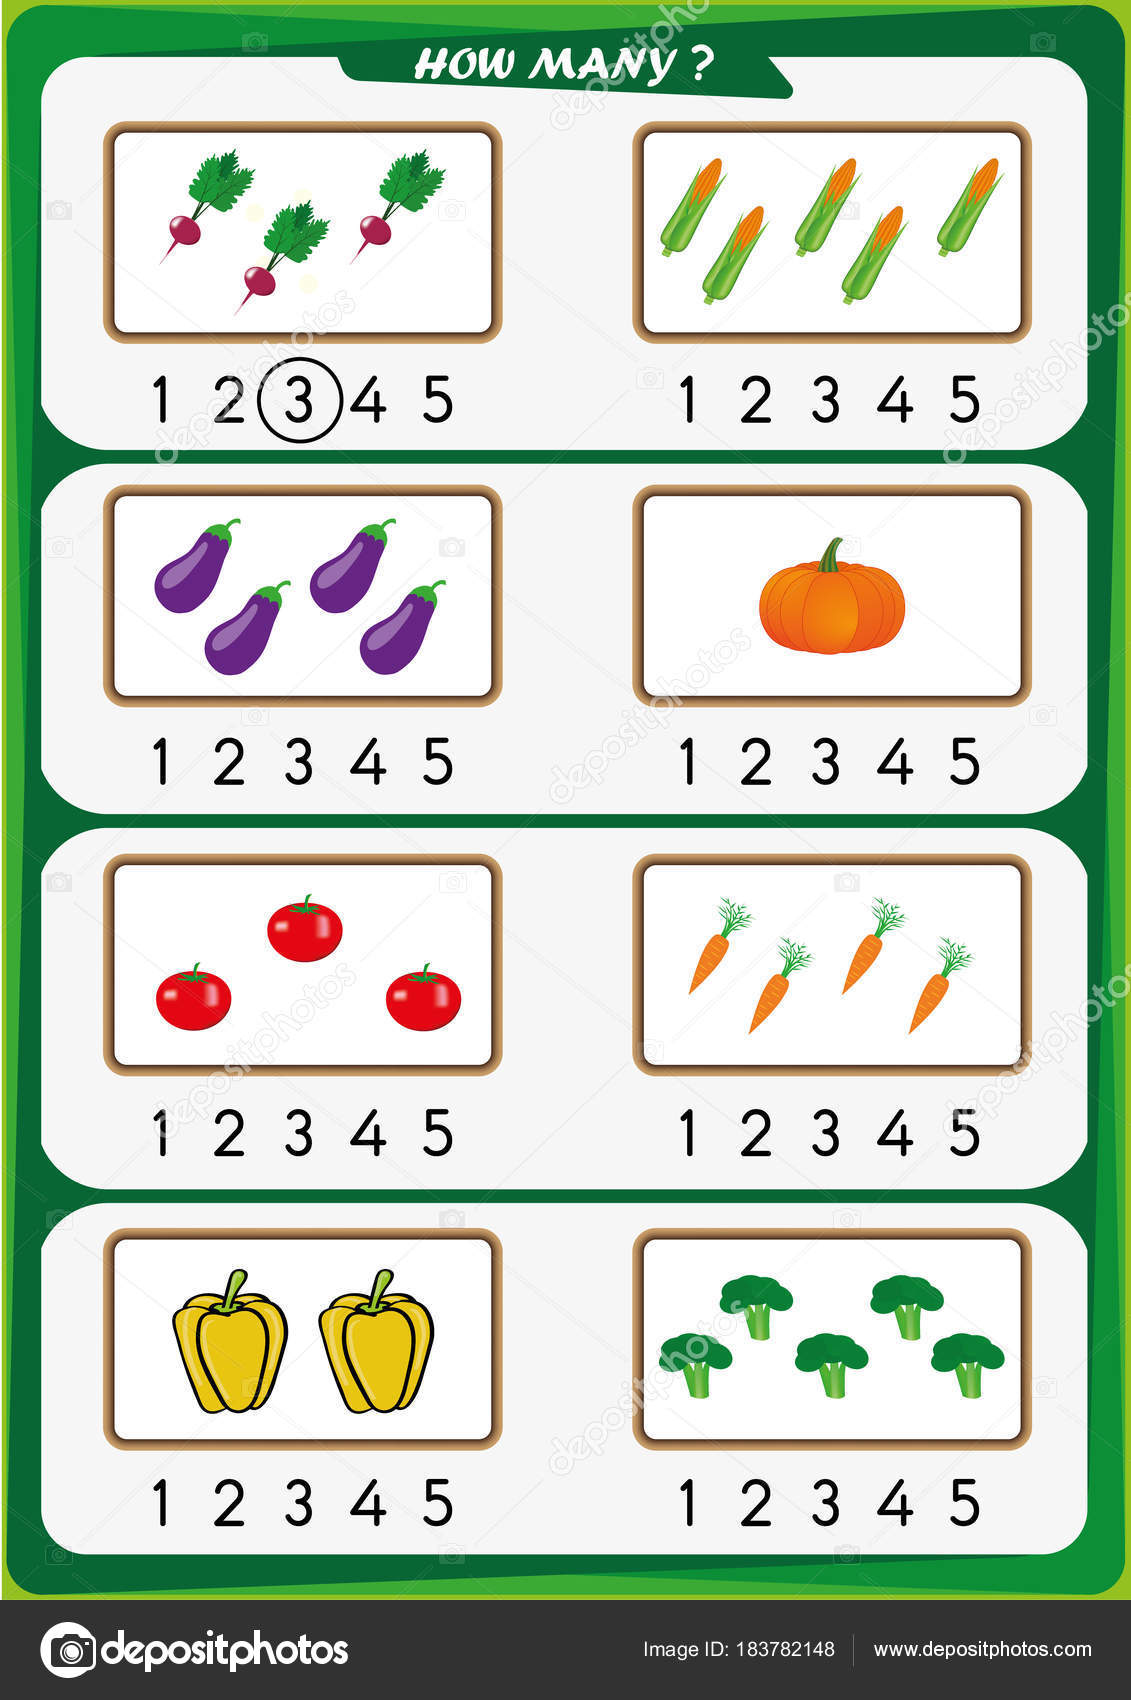 Worksheet For Kindergarten Kids Count The Number Of Objects Learn The Numbers 1 2 3 4 5 